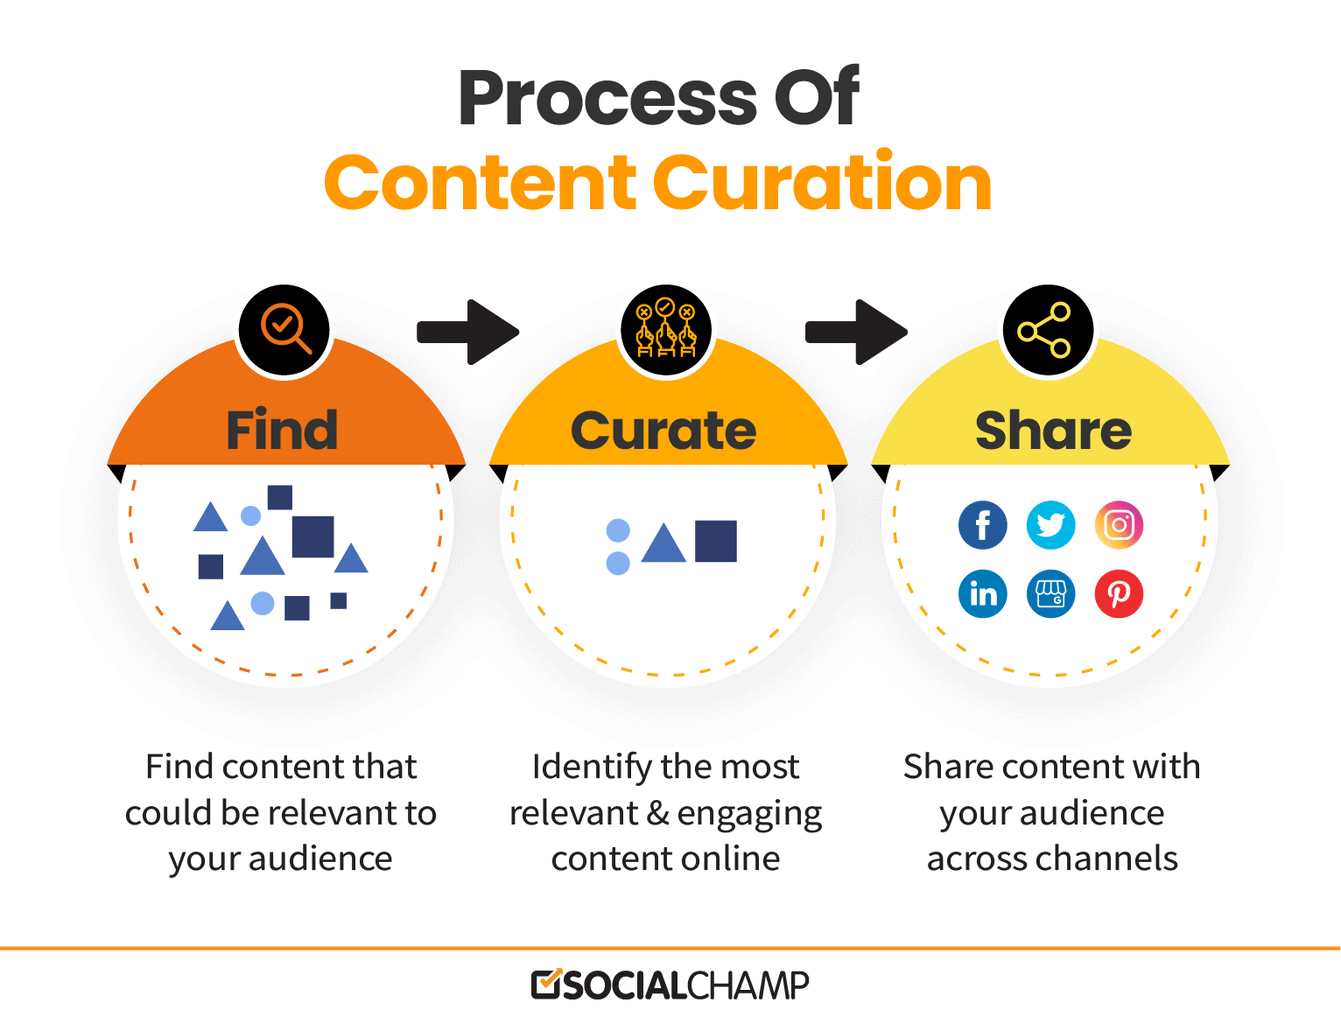 Process of Content Curation